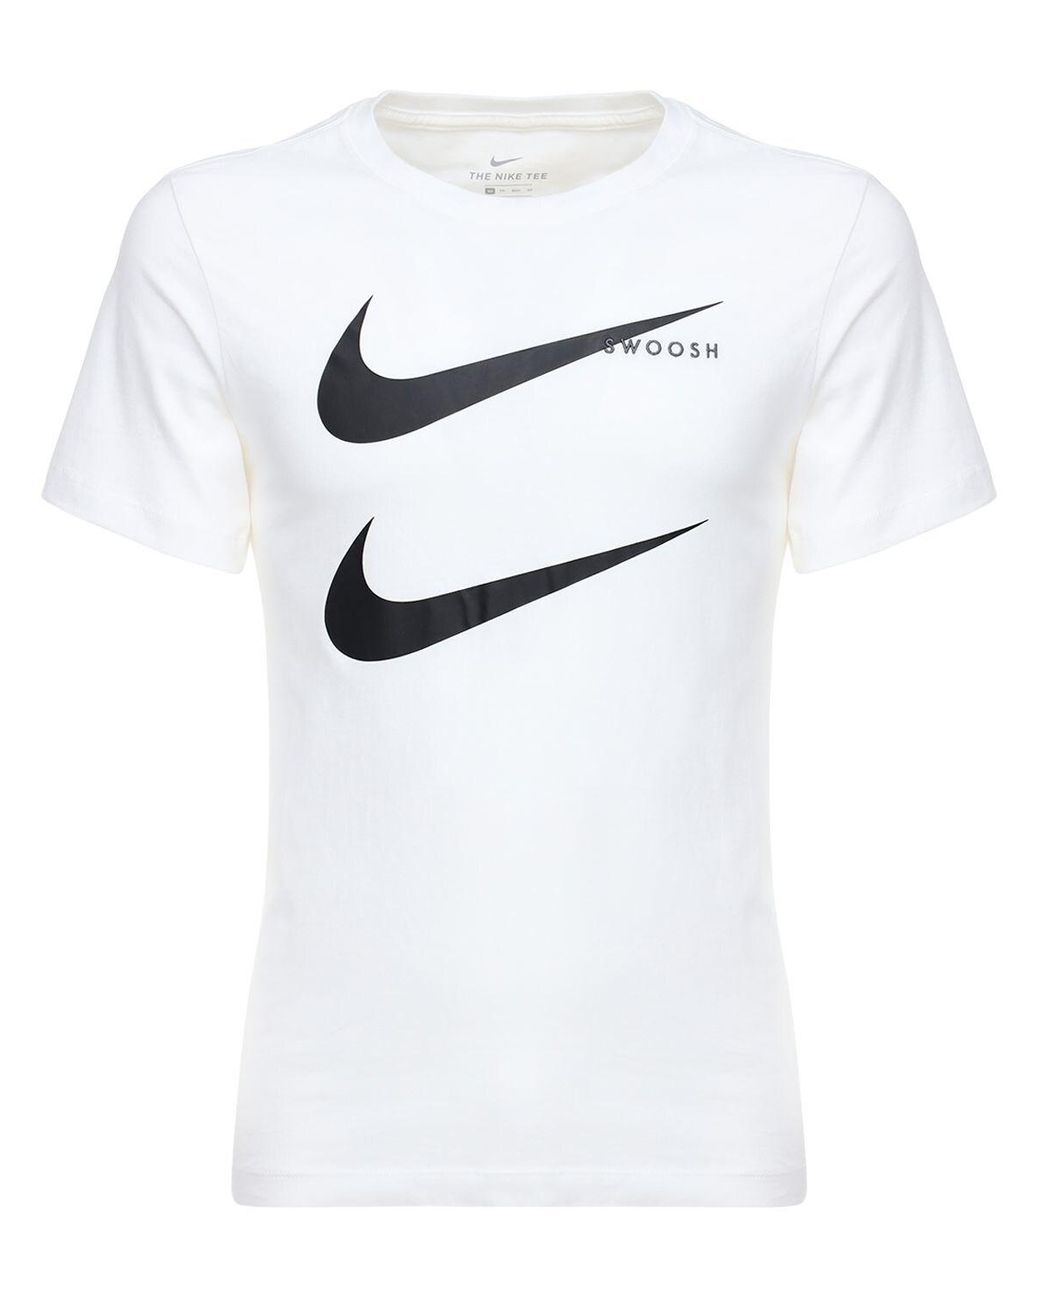 Nike Double Swoosh Cotton T-shirt in White for Men | Lyst Canada